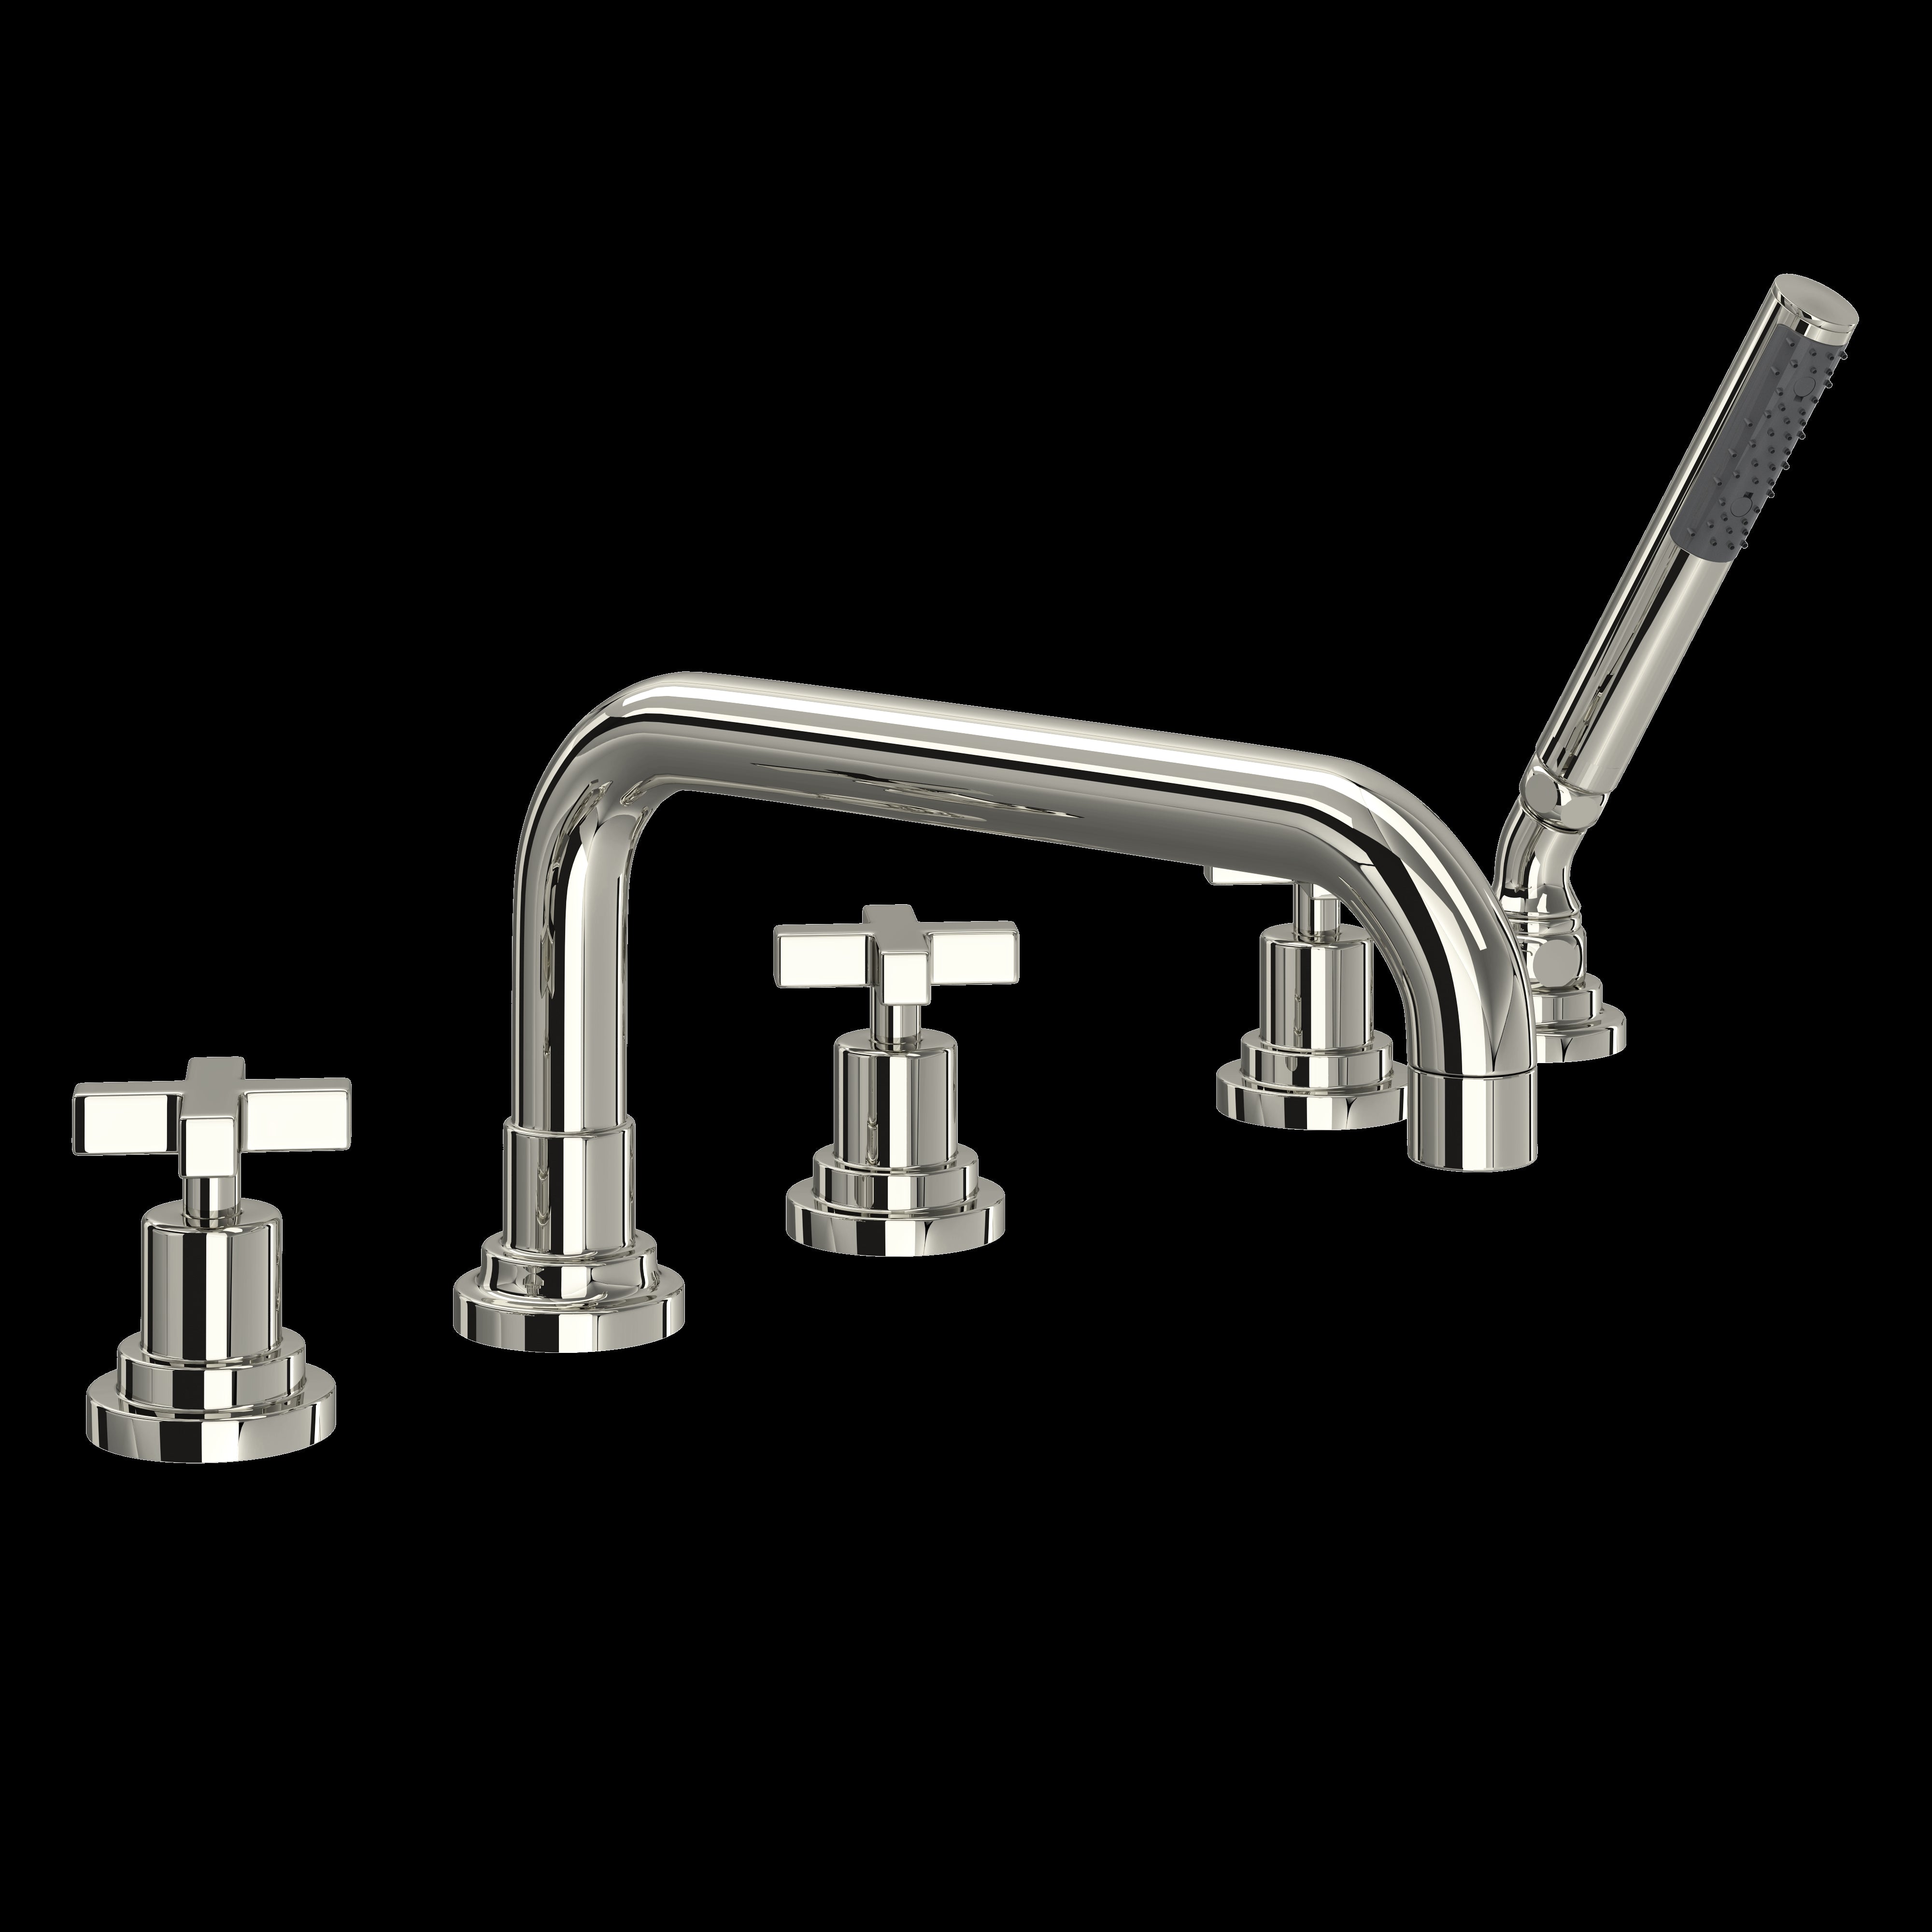 ROHL A2224 Lombardia 5-Hole Deck Mount Tub Filler With U-Spout